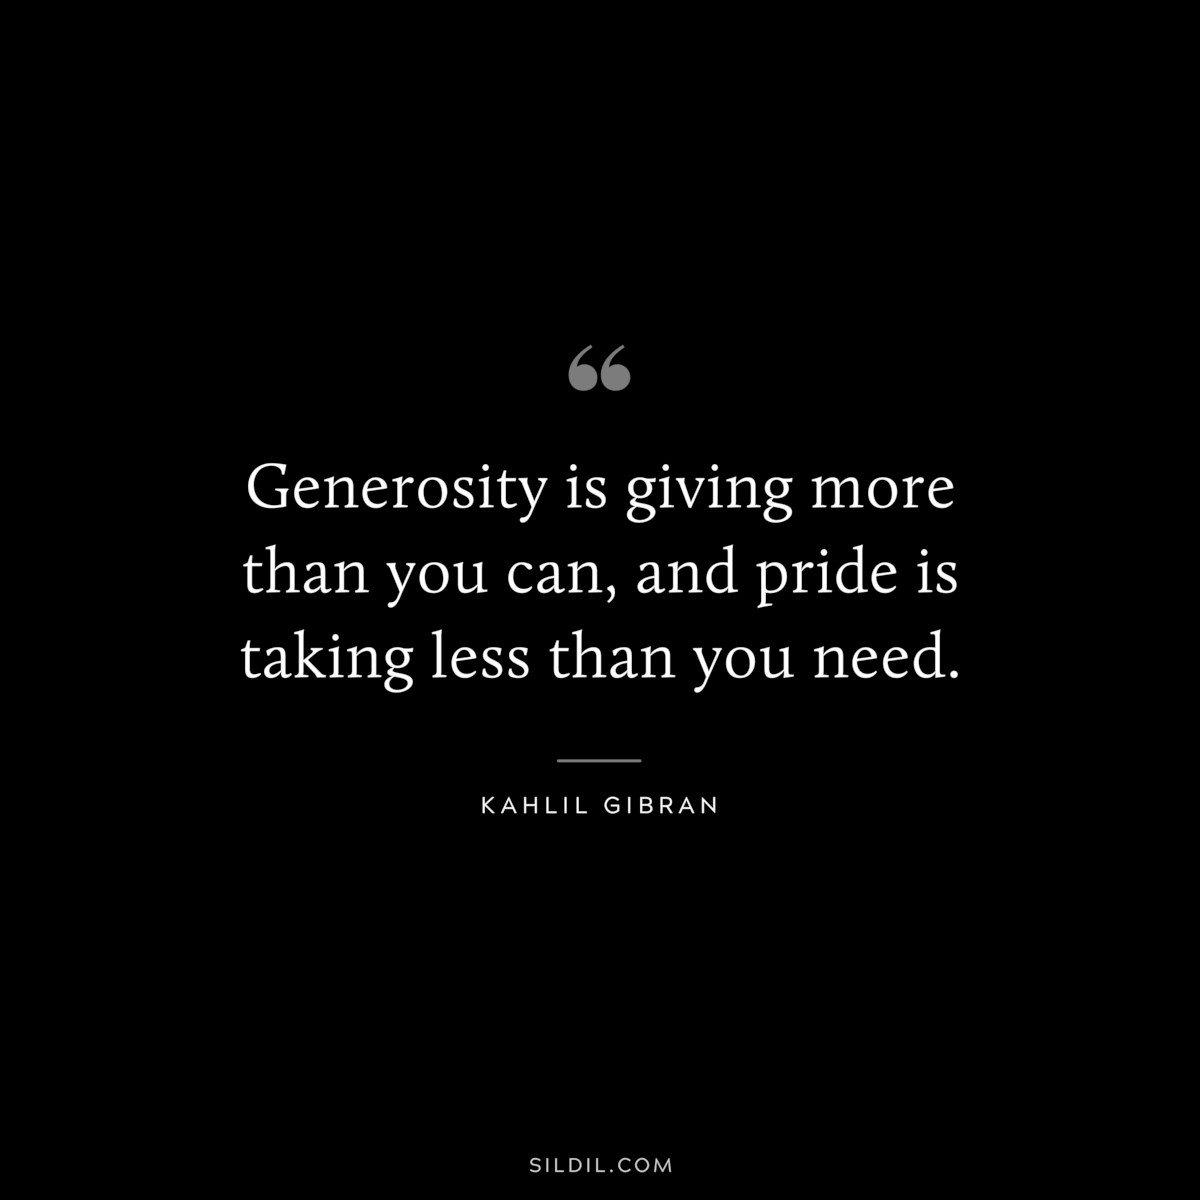 Generosity is giving more than you can, and pride is taking less than you need. ― Kahlil Gibran